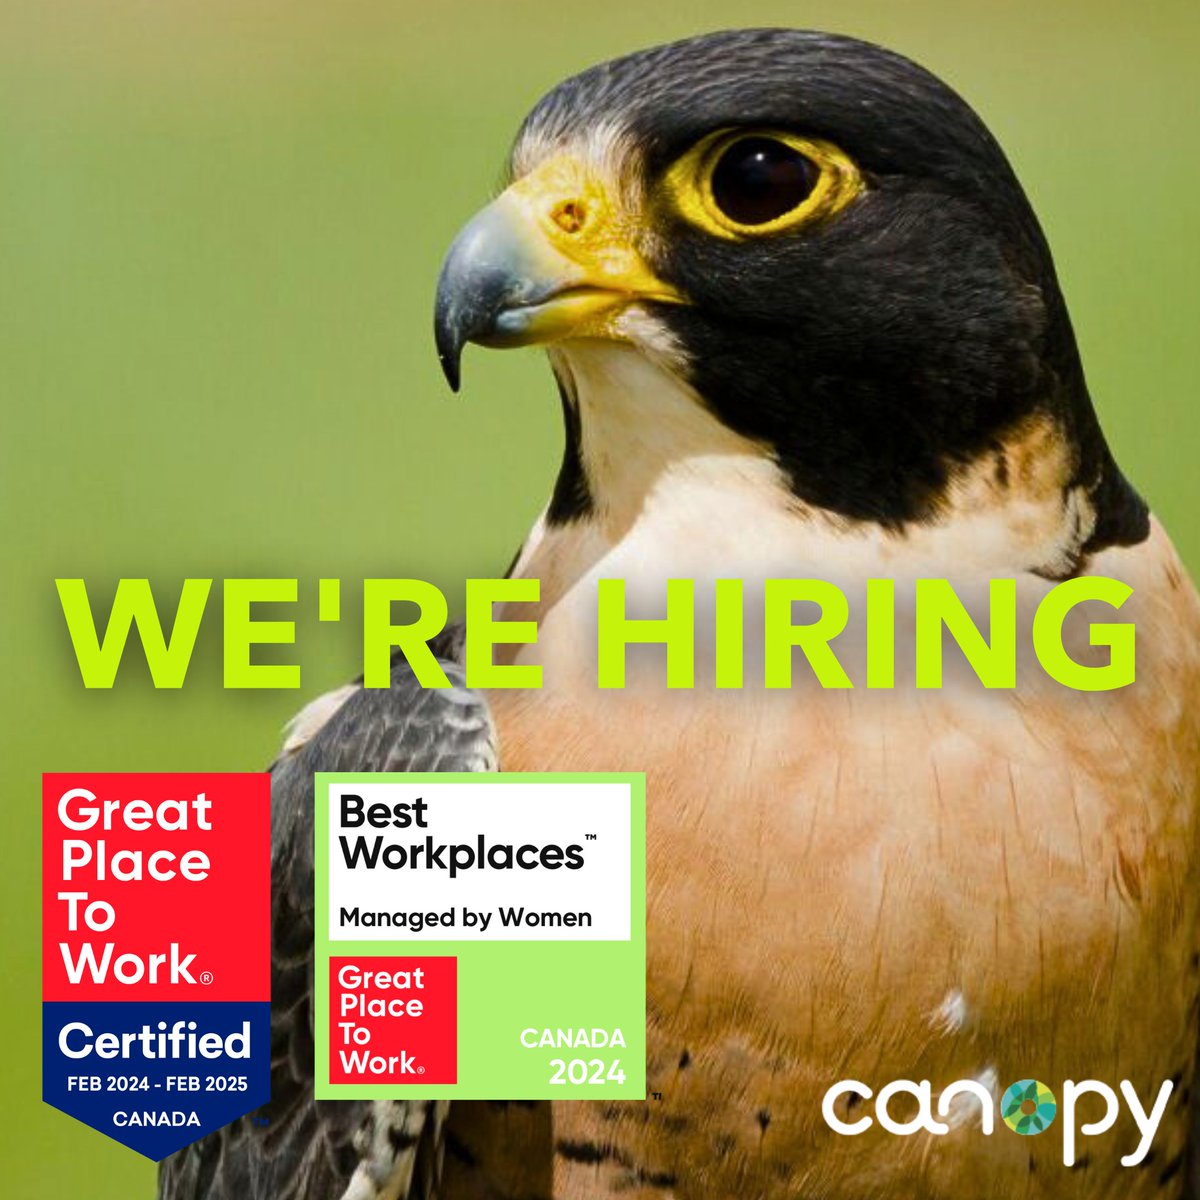 Join us! @CanopyPlanet is on the look out for a Director of Institutional Giving who can soar high as our Fundraising Falcon. Apply today and make a real impact by helping Canopy save the world’s most endangered forests: bit.ly/49qyp1G | #NowHiring #GreenJobs